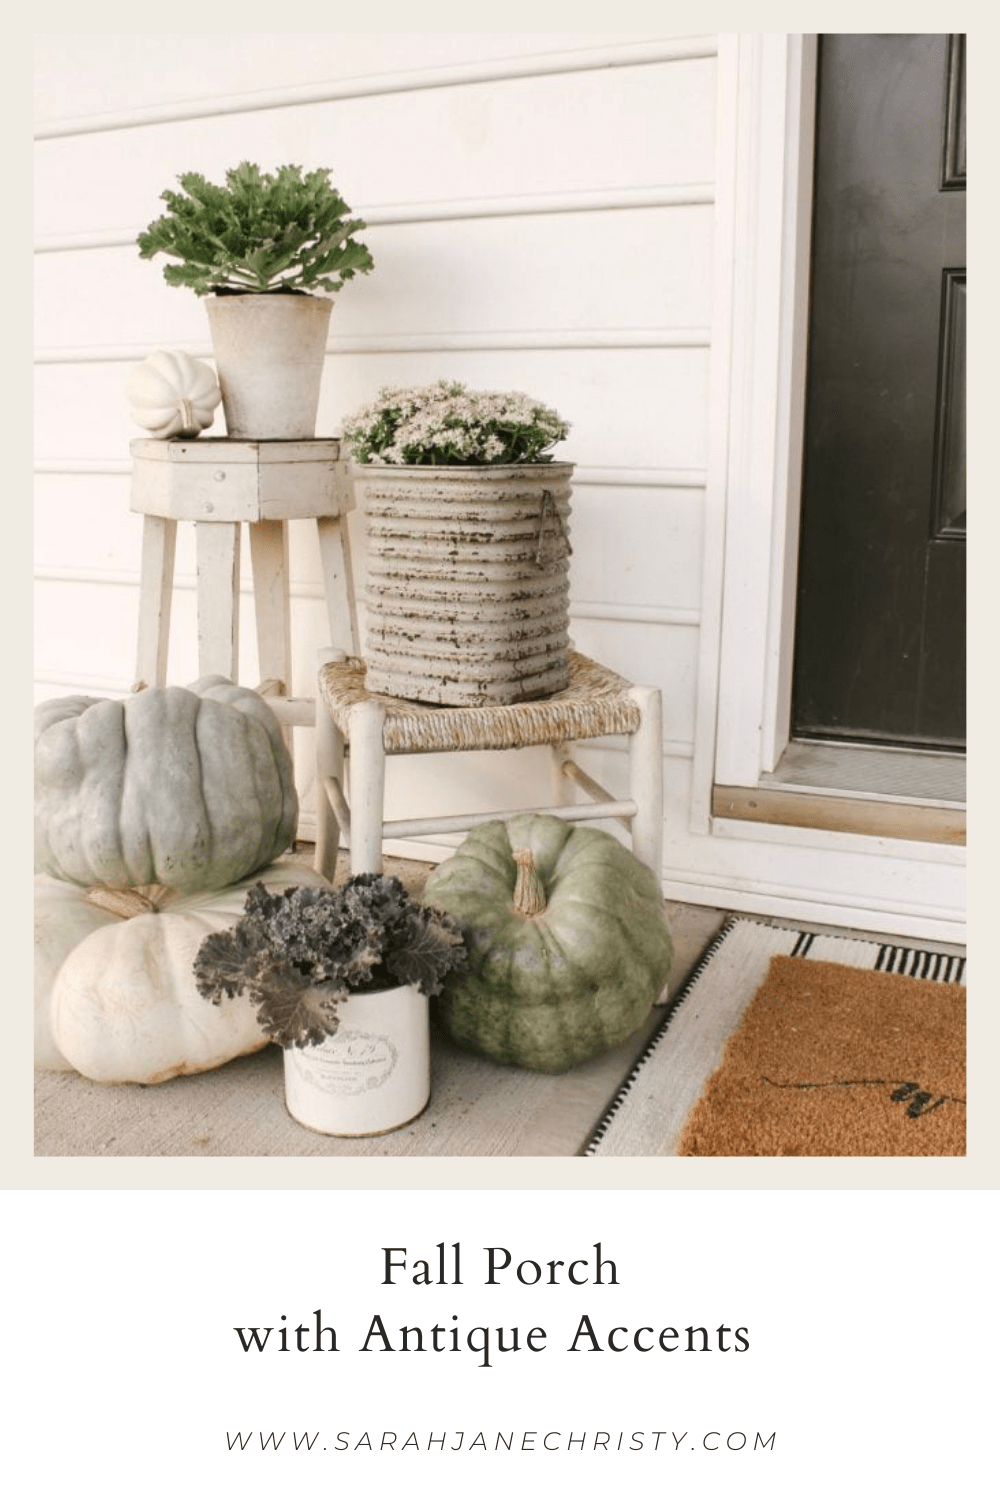 Fall Porch with Antique Accents, Heirloom Pumpkins & Kale